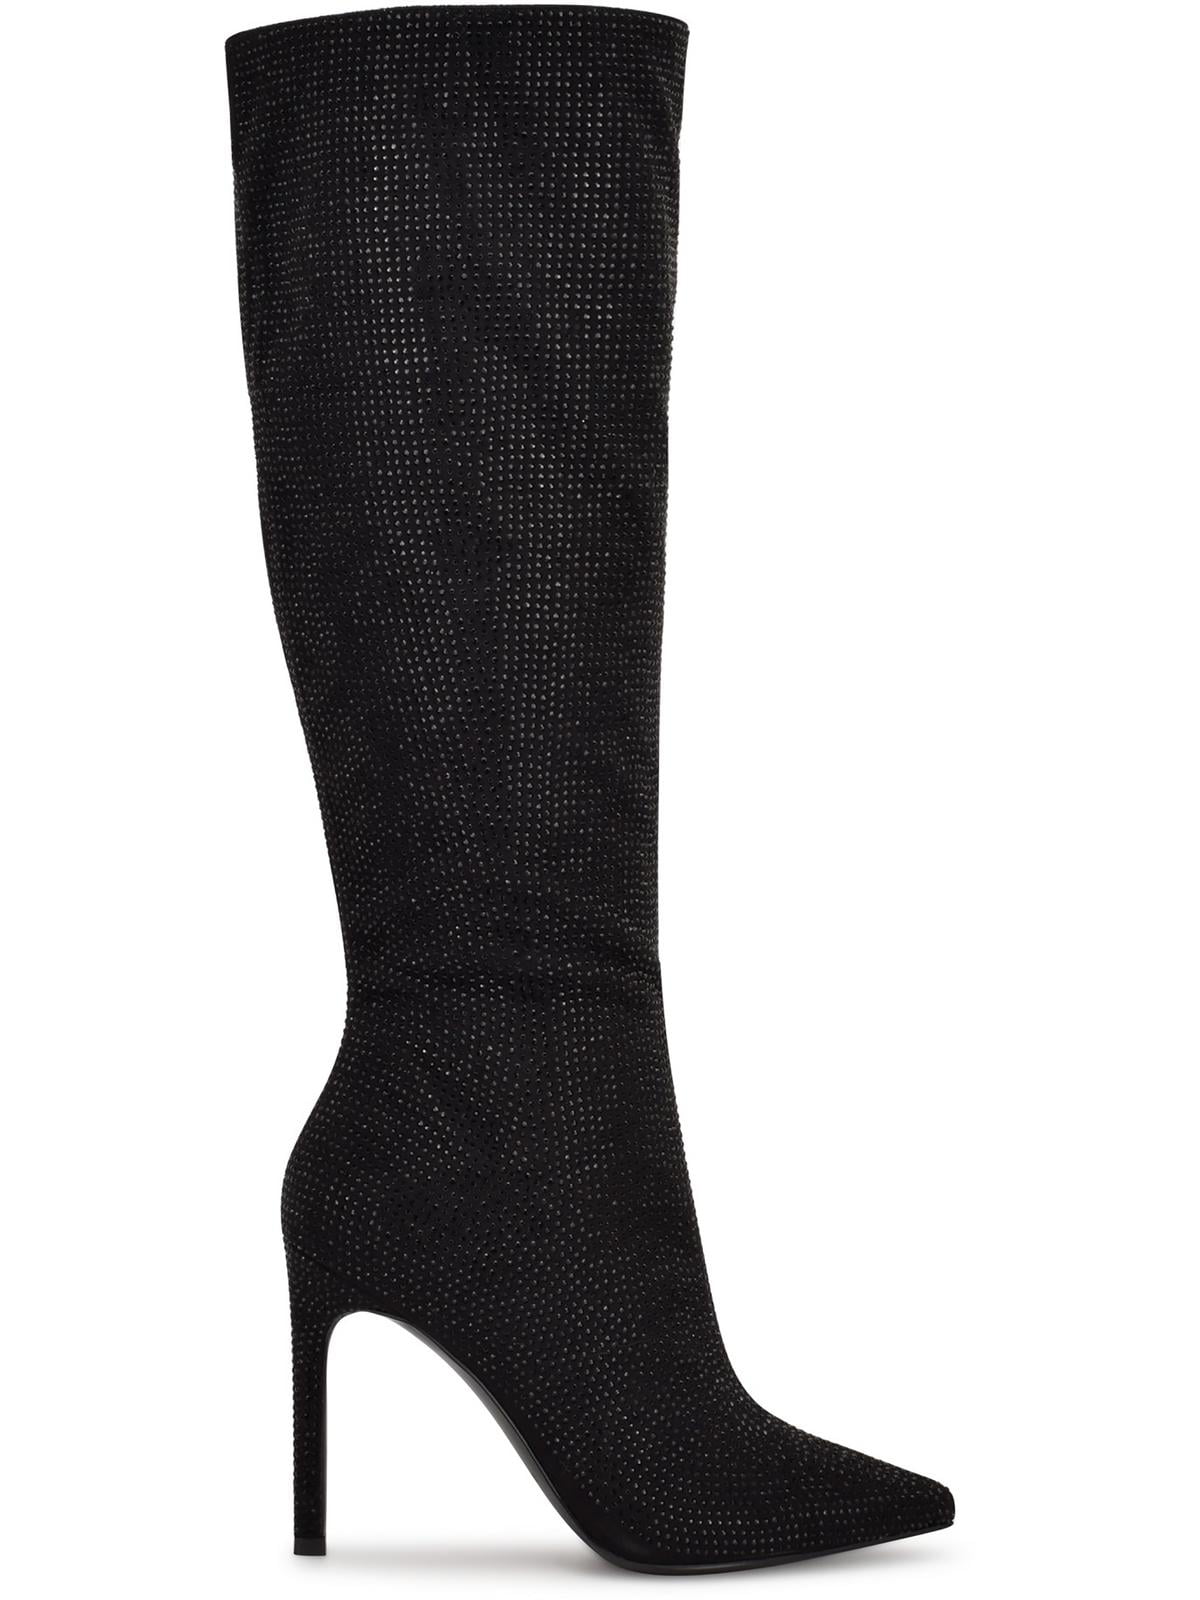 Finding Friday Black Embellished Stiletto Heel Boots | New Look